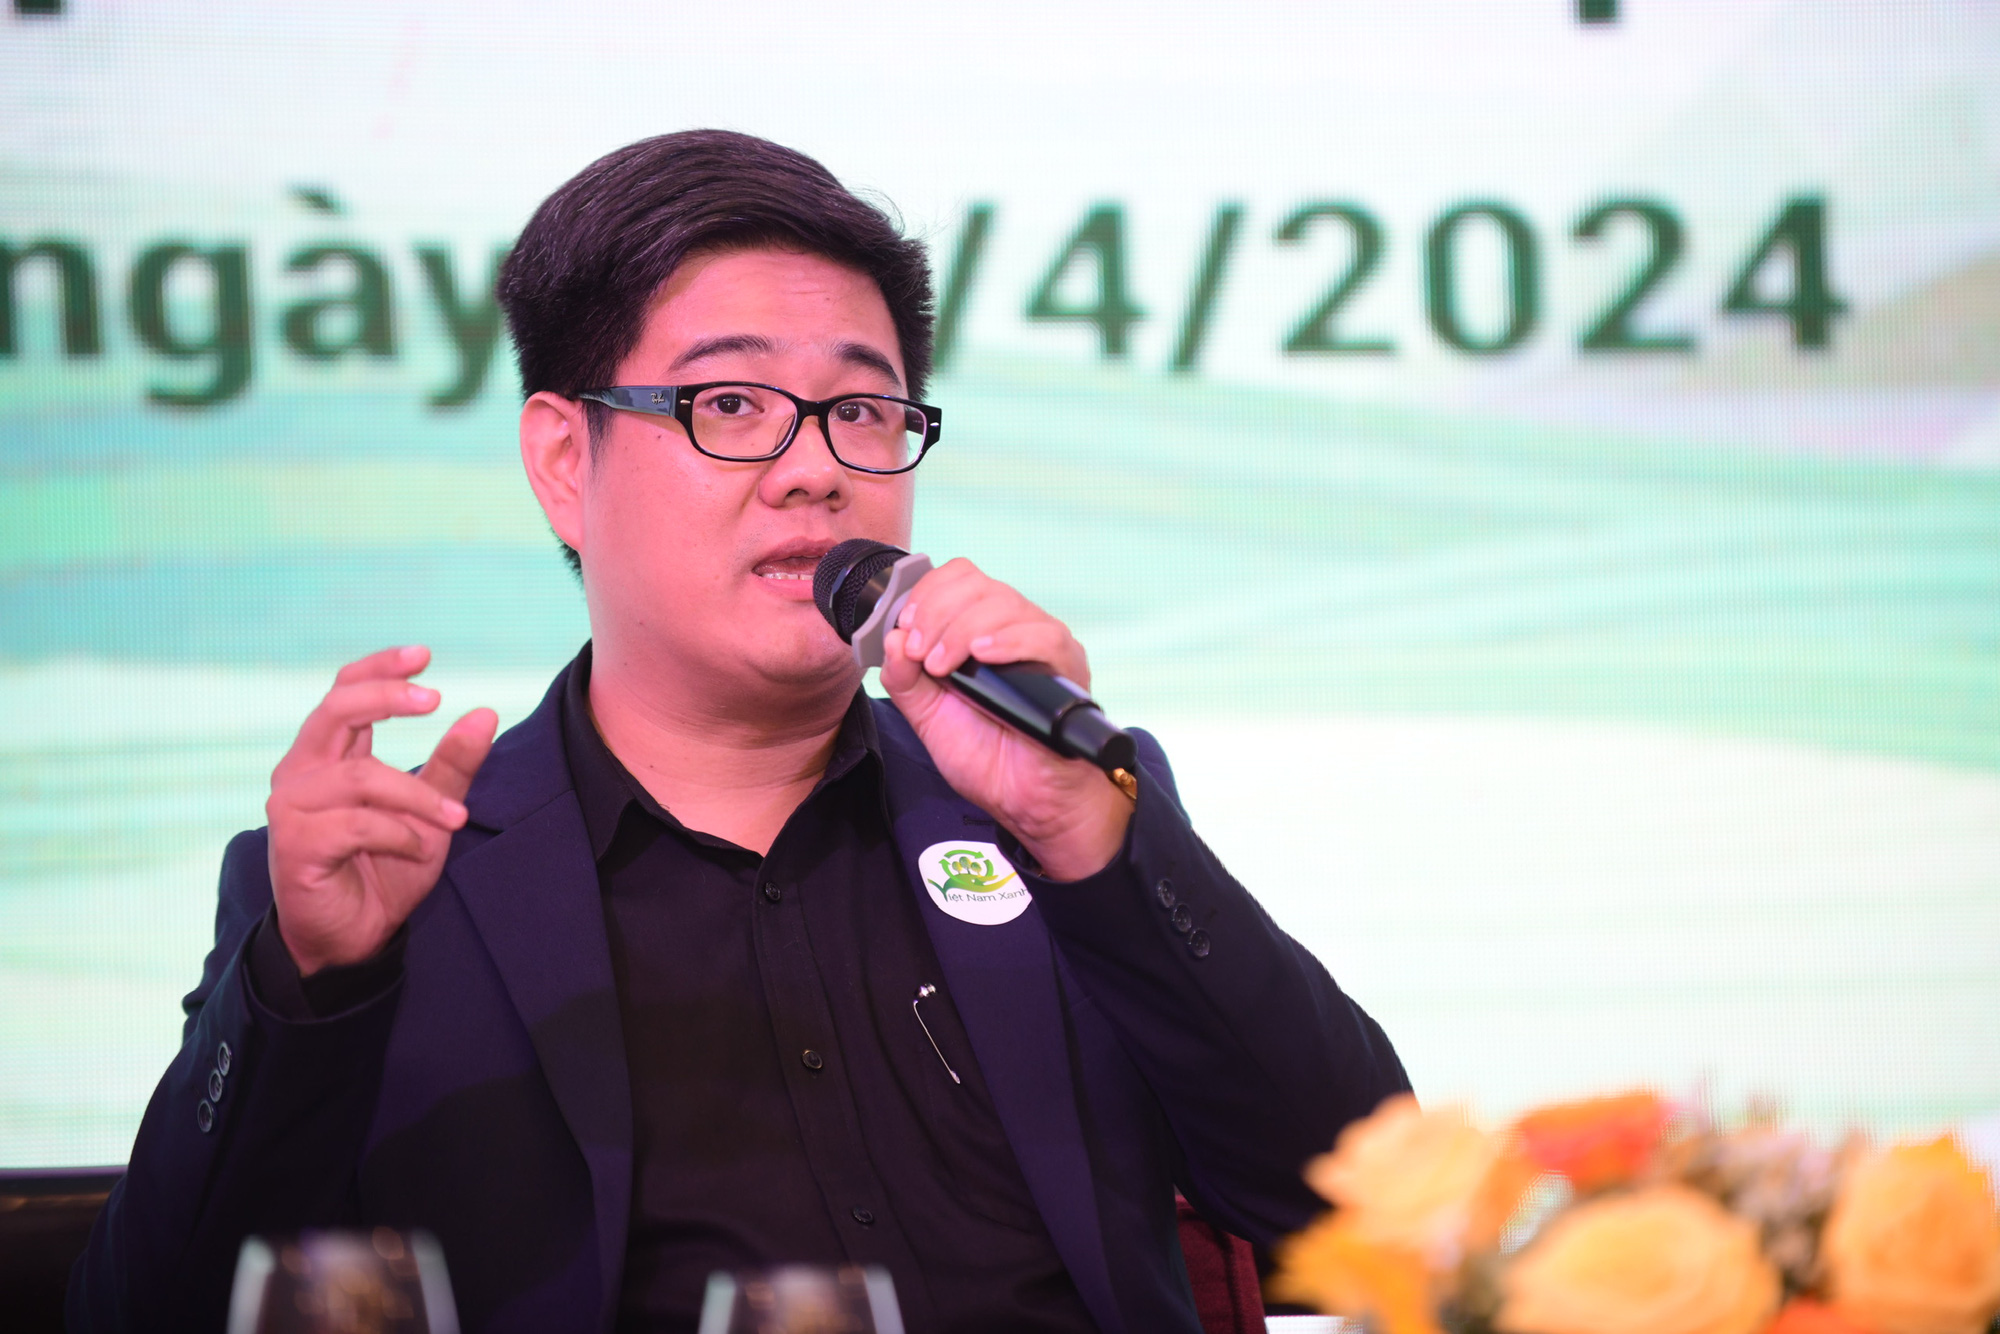 Nguyen Vo Truong An, deputy general director of ASEAN Carbon Credit Exchange JSC (CCTPA), speaks at the ‘Carbon Credit Market - A Driver for Building a Green Vietnam’ conference held in Ho Chi Minh City, April 20, 2024. Photo: Quang Dinh / Tuoi Tre